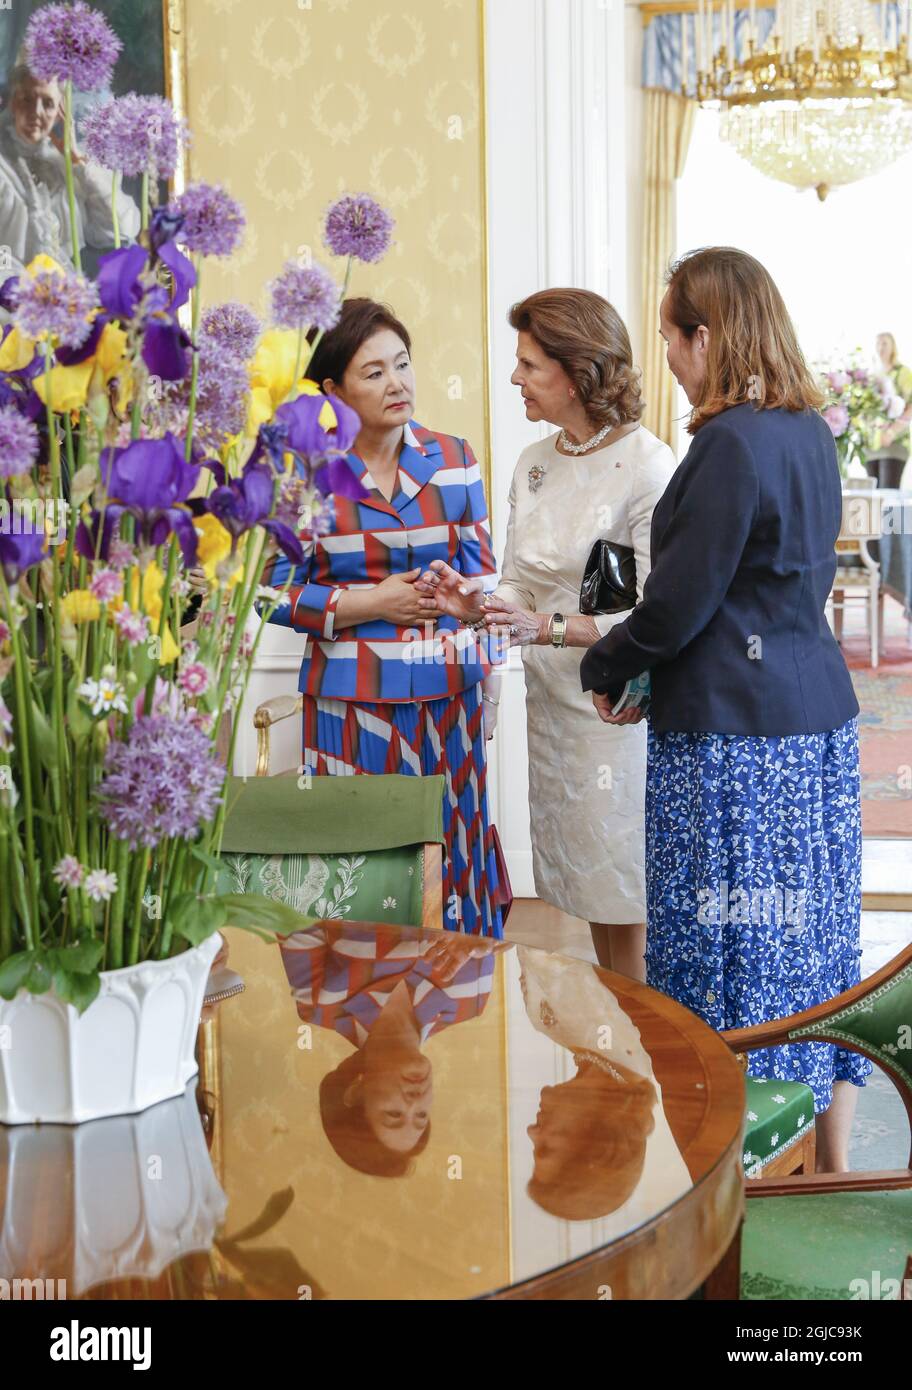 STOCKHOLM 20190615 Sweden's Queen Silvia and South Koreas First Lady Kim Jung-sook visit 'Prins Eugens Waldemarsudde' museum in Stockholm, and are shown around by Superintendent Karin SidÃ©n Sweden, on June 15, 2019. The South Korean Presidential couple is in Sweden for a two day state visit. Foto: Johan Jeppsson / TT / kod 2551 *** BETALBILD ***  Stock Photo